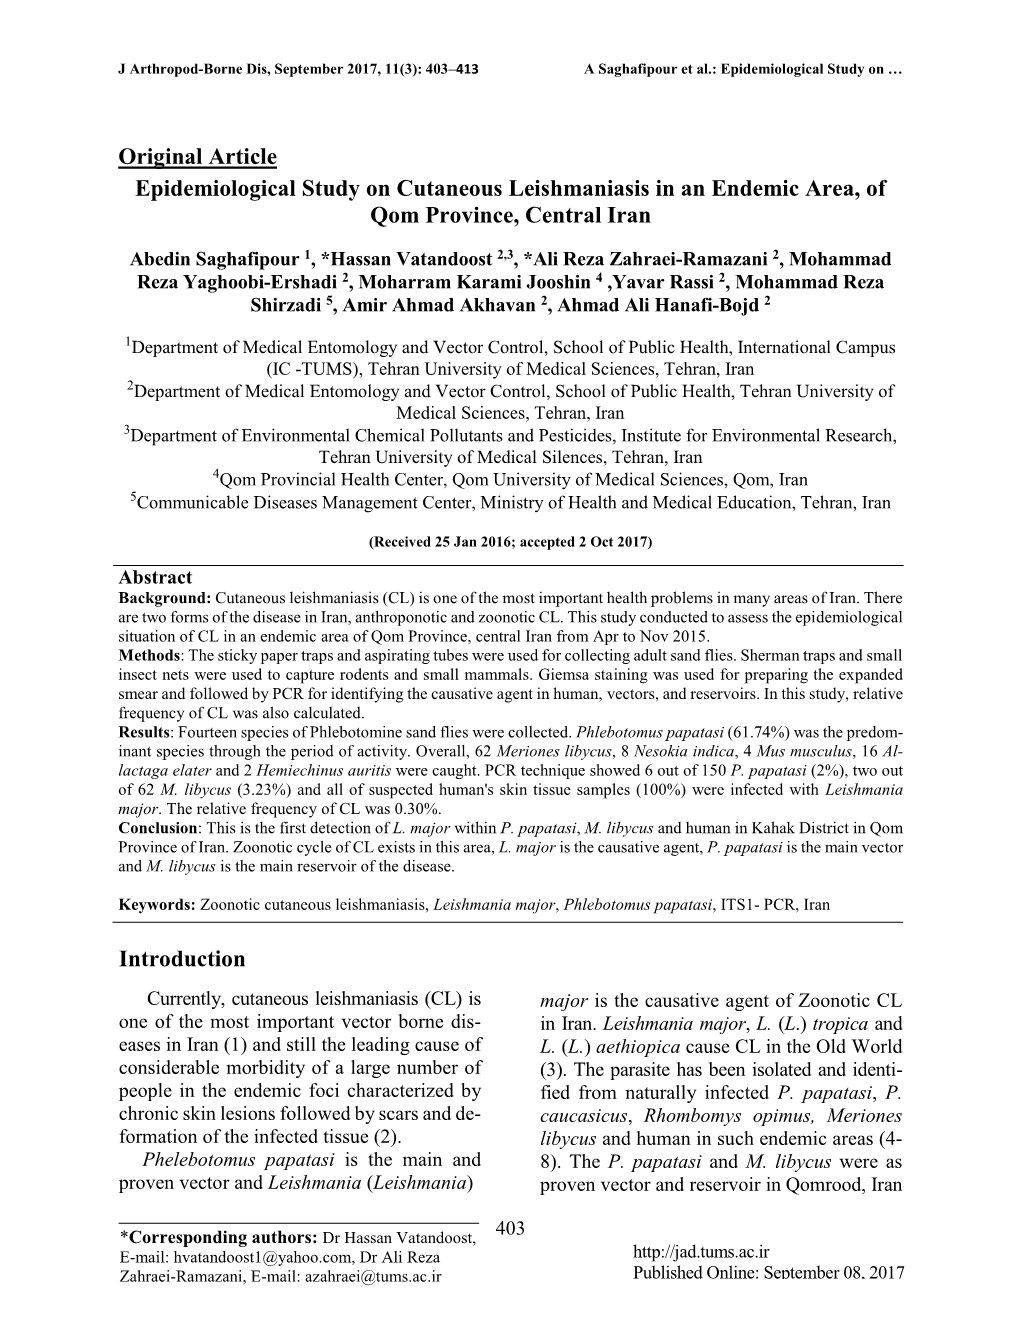 Original Article Epidemiological Study on Cutaneous Leishmaniasis in an Endemic Area, of Qom Province, Central Iran